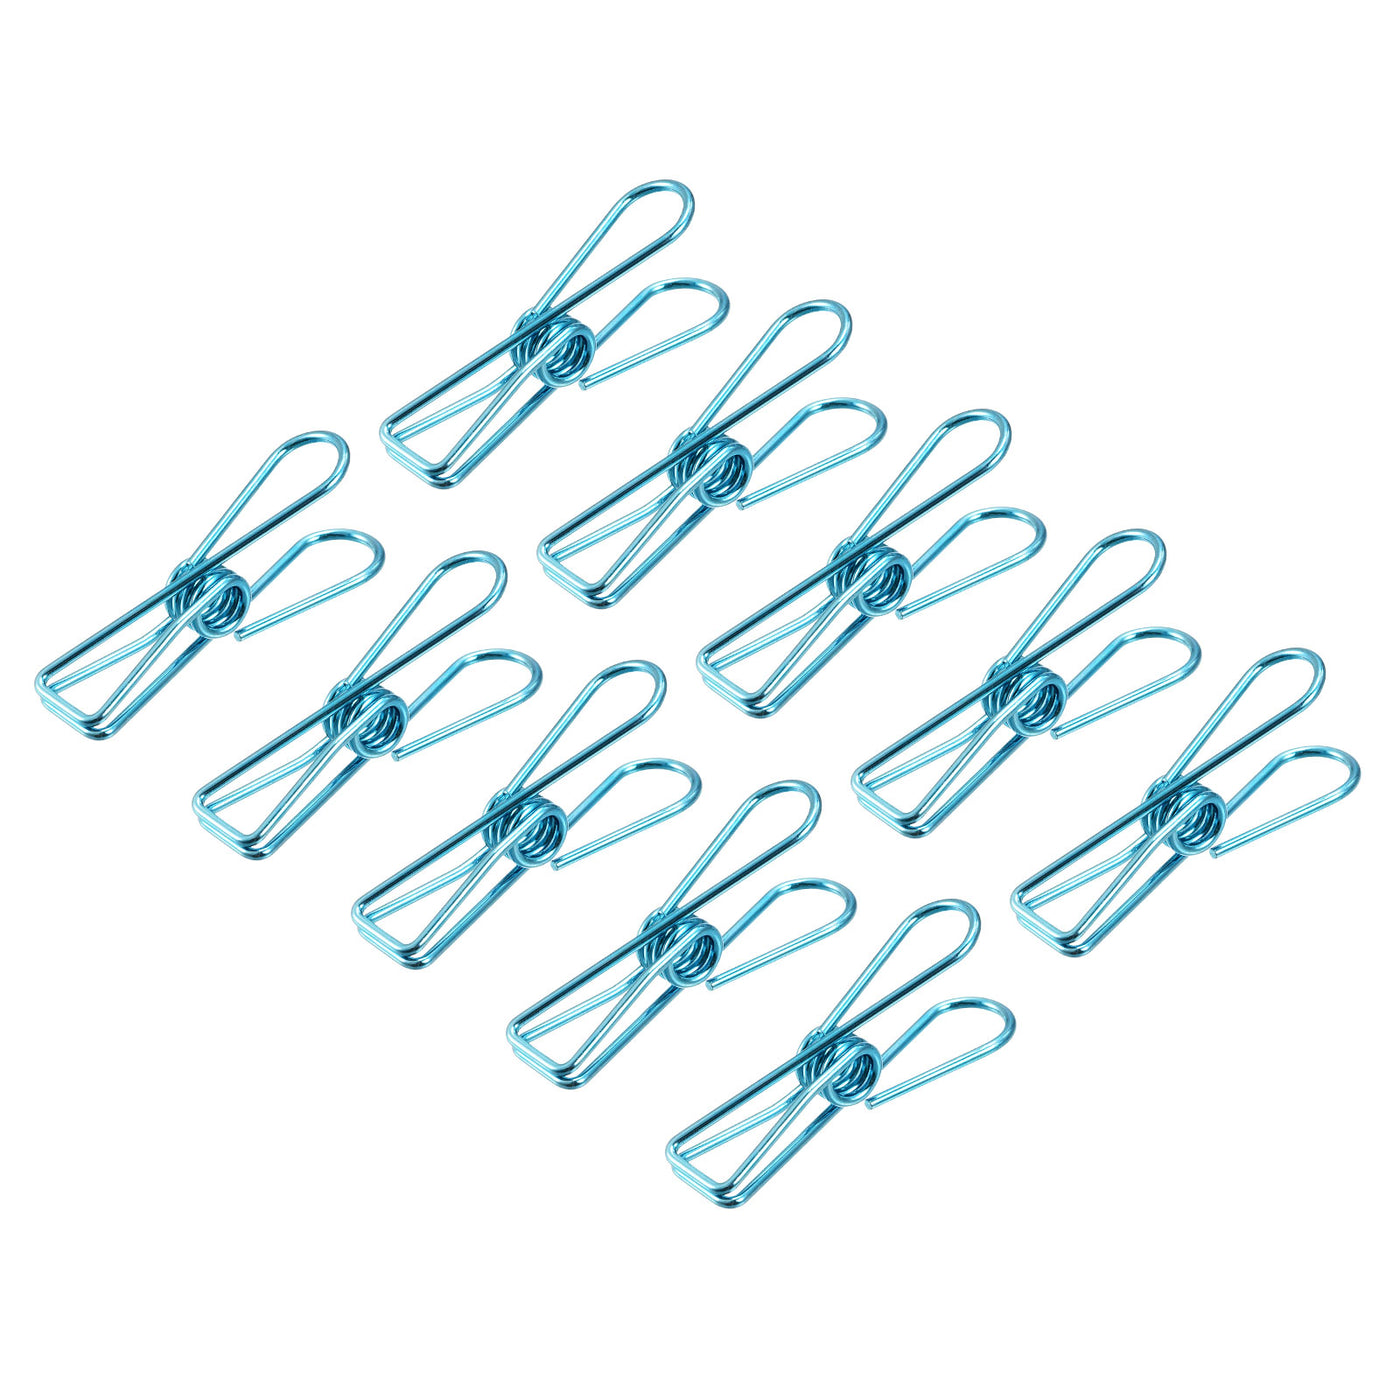 uxcell Uxcell Tablecloth Clips, 32mm Carbon Steel Clamps for Fixing Table Cloth, Blue 25 Pcs